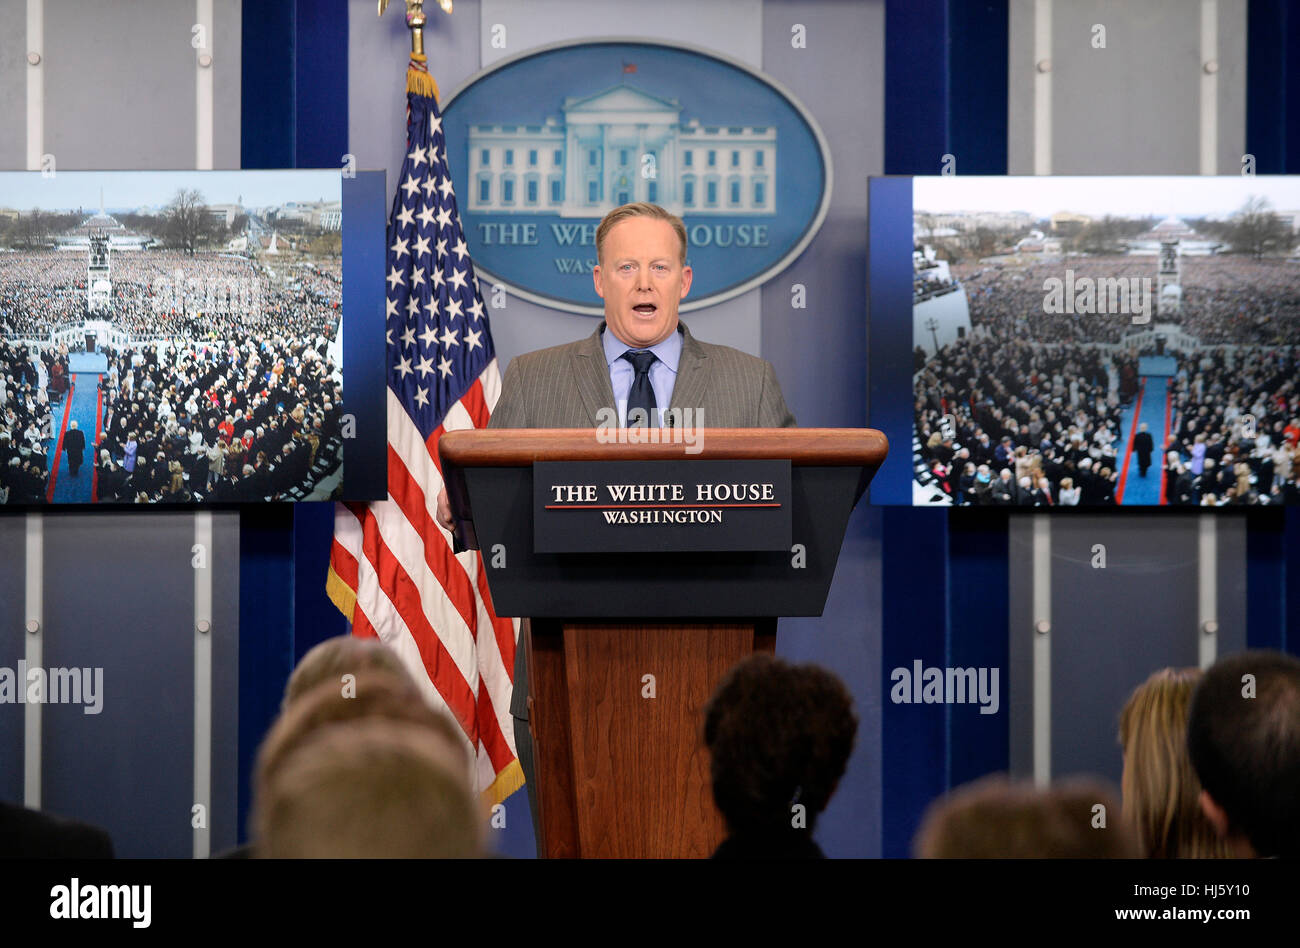 Washington DC, USA. 21st January, 2017. White House press secretary Sean Spicer delivers angry remarks as he speaks in the press briefing room January 21, 2017 in Washington, DC. Spicer was upset over what what he considers to be inaccurate and unfair press coverage over the past 48 hours. Credit: Olivier Douliery/Pool via CNP /MediaPunch Credit: MediaPunch Inc/Alamy Live News Stock Photo